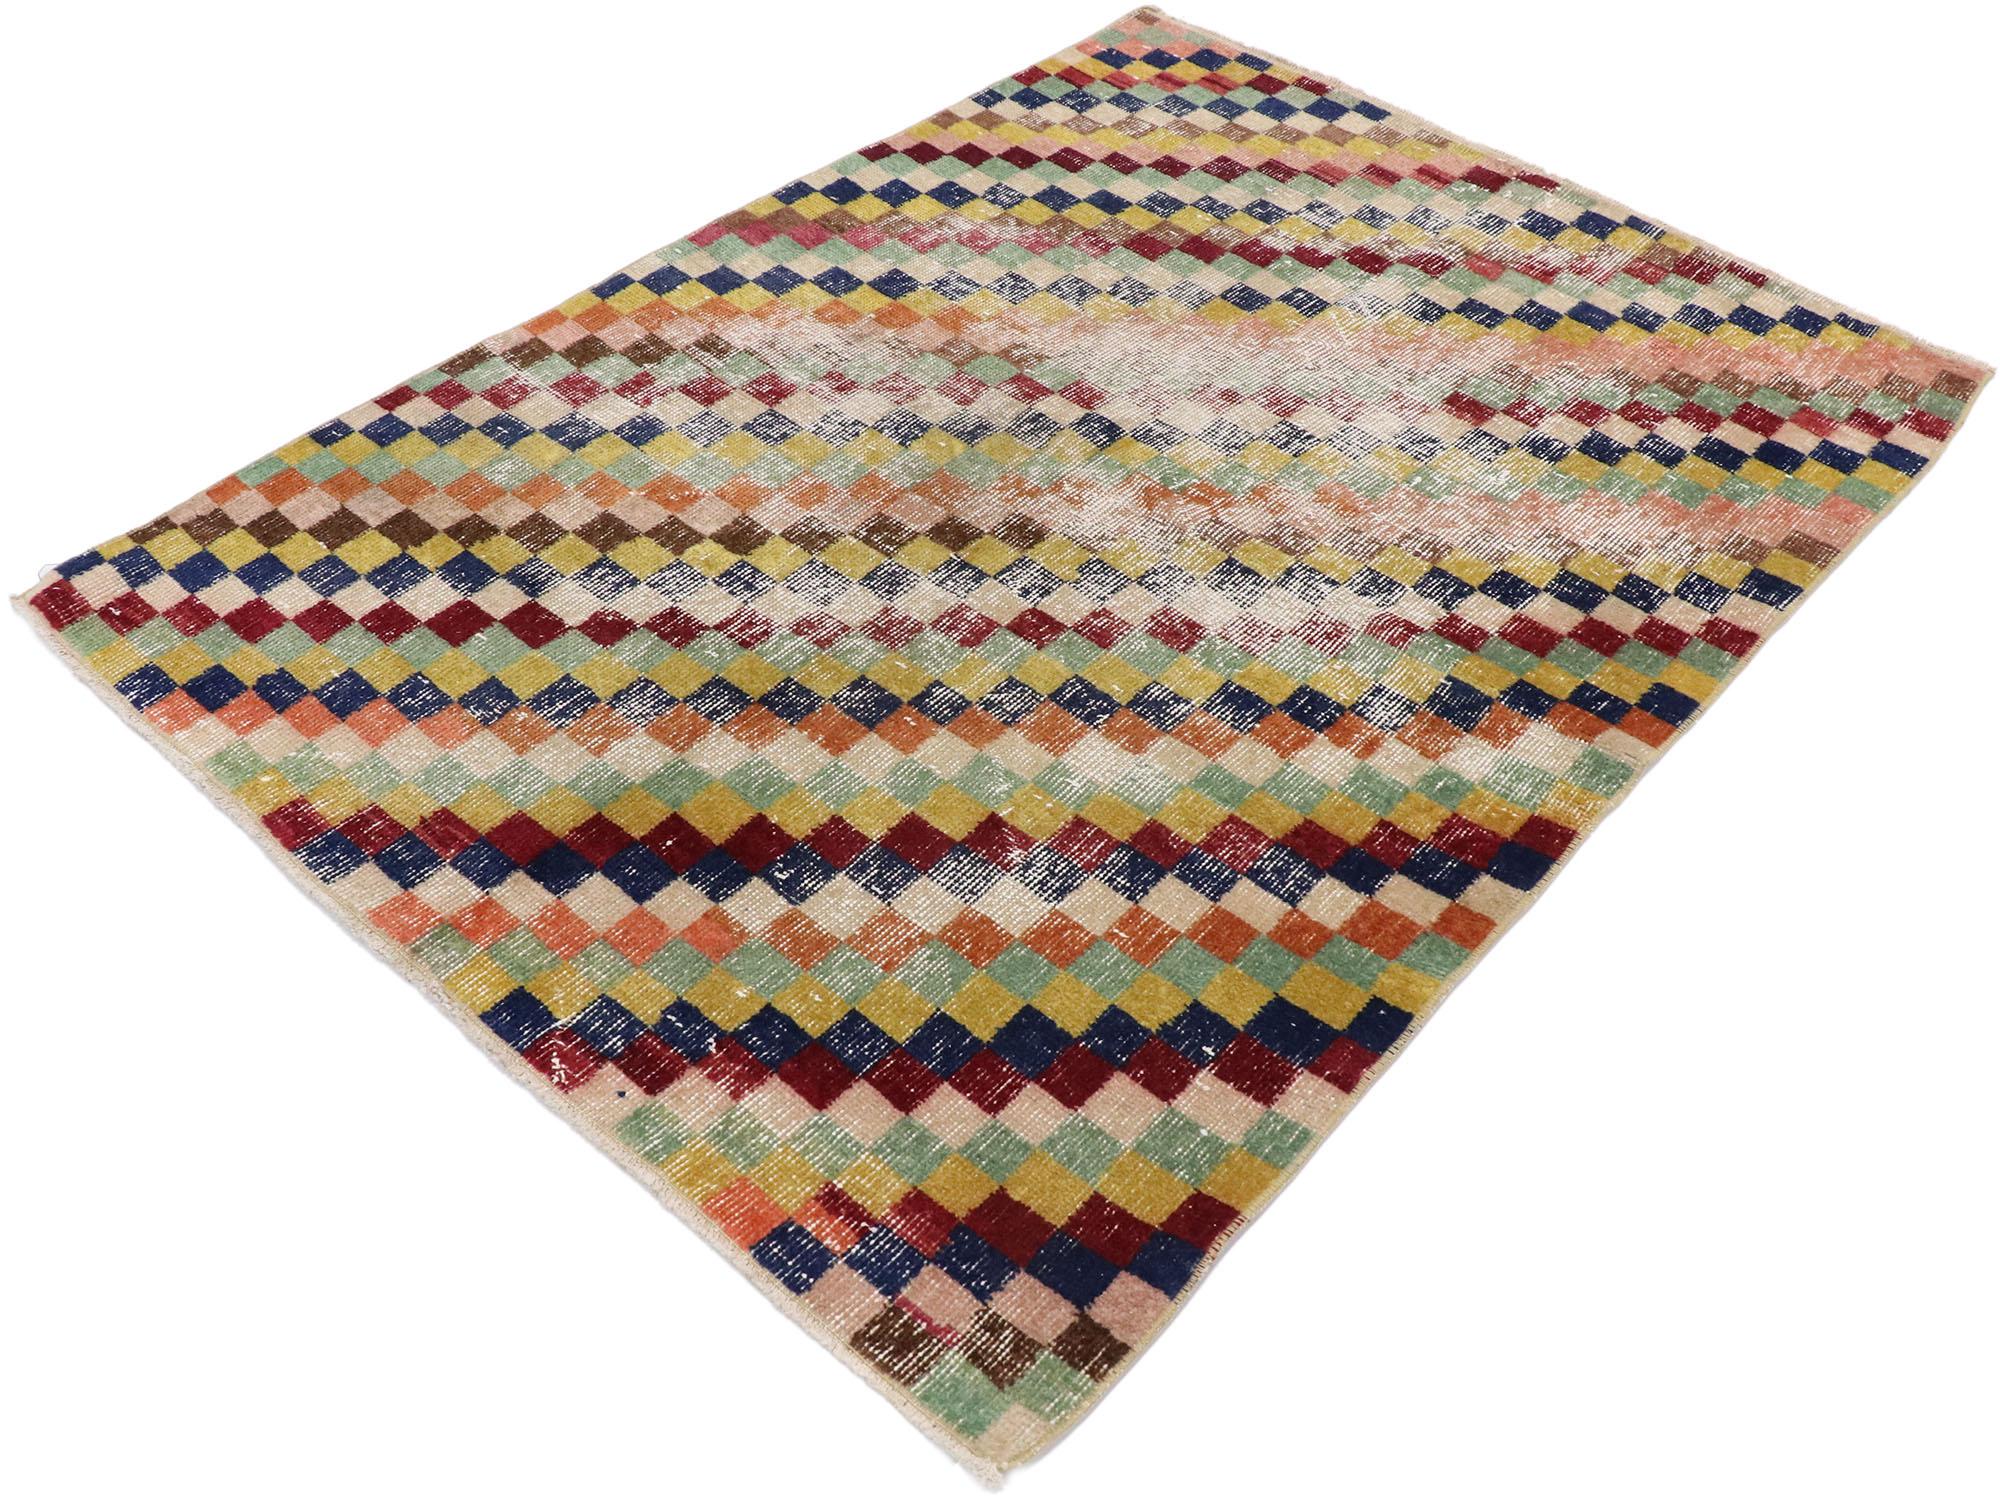 53342, distressed vintage Turkish Sivas rug with Postmodern Cubist style. This hand knotted wool distressed vintage Turkish Sivas rug features an all-over checkered diagonal stripe pattern comprised of rows of multicolored diamonds. Each row of